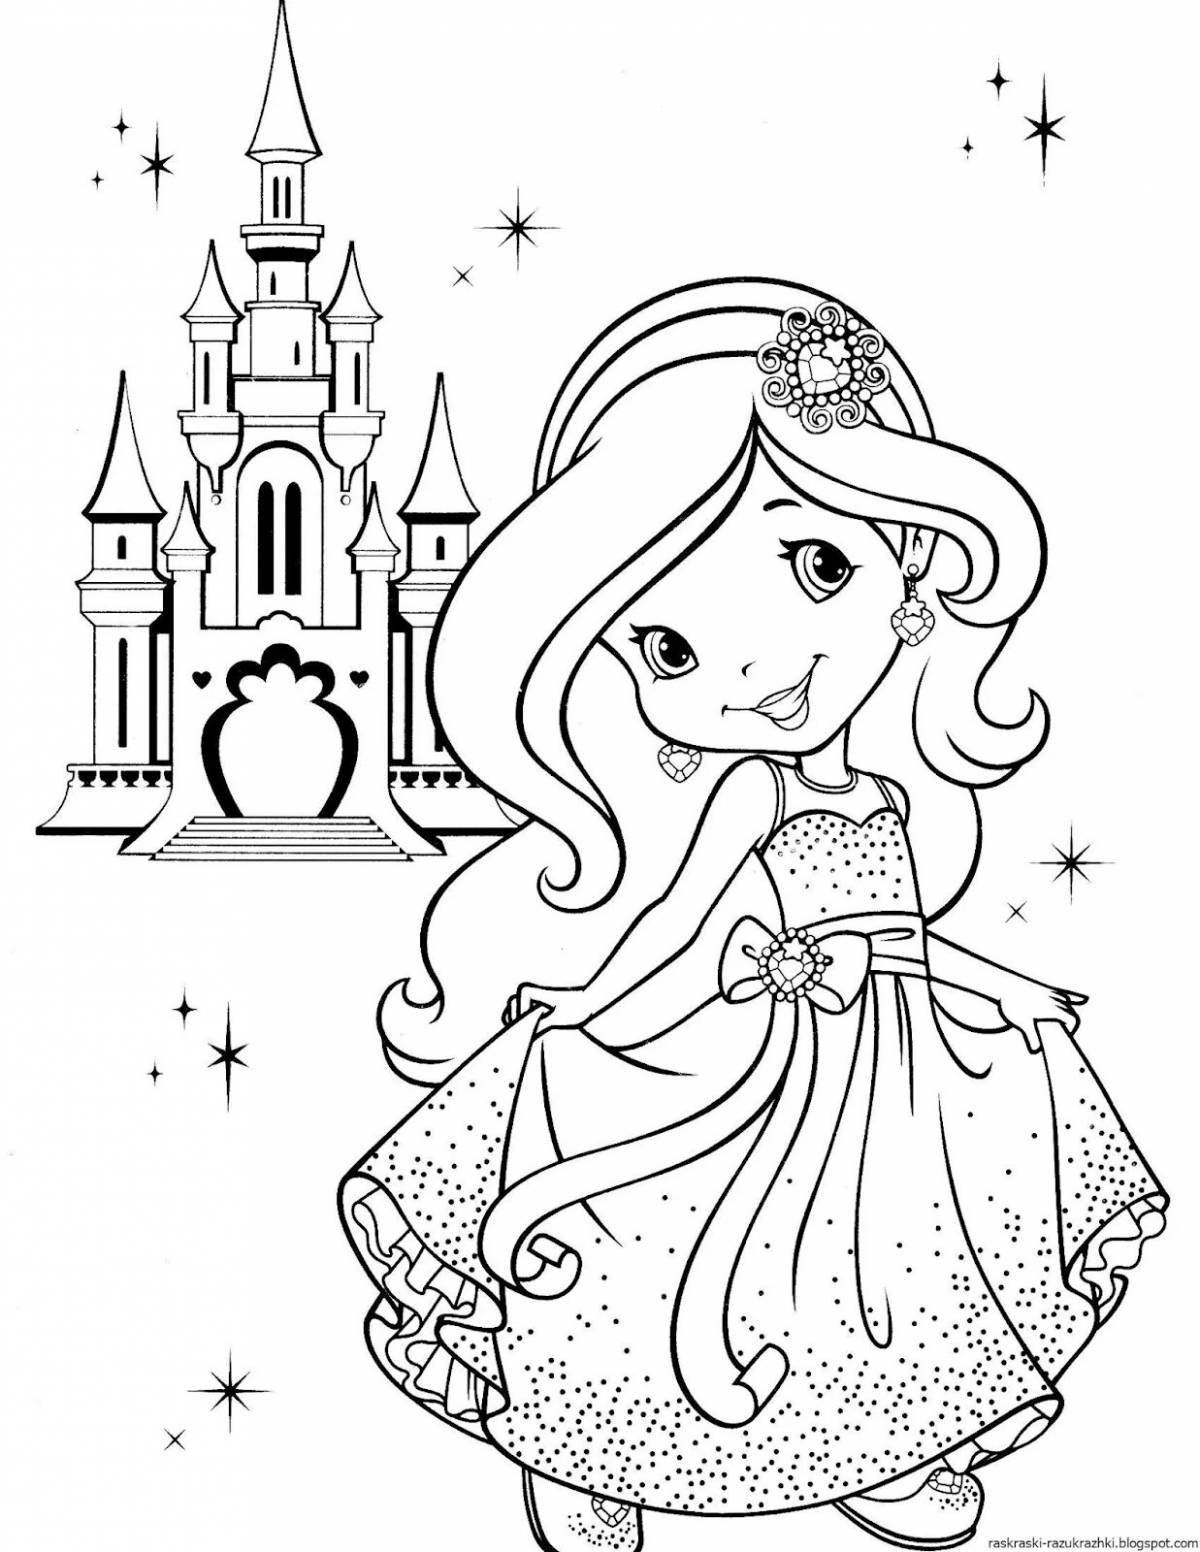 Violent coloring of princesses 4-5 years old